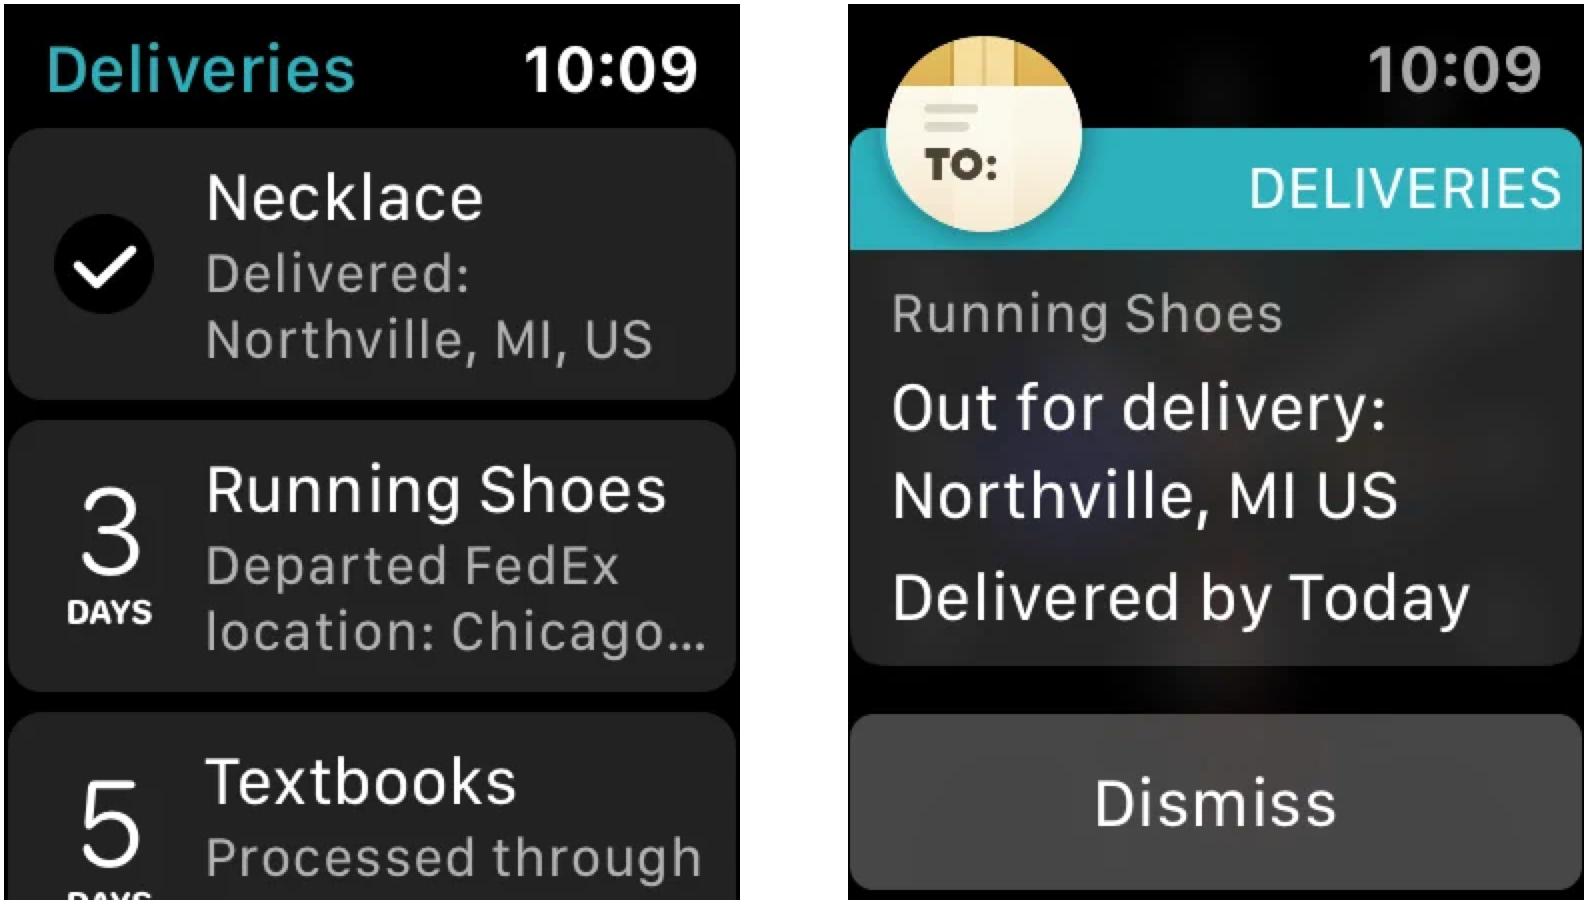 Deliveries Apple Watch Screens